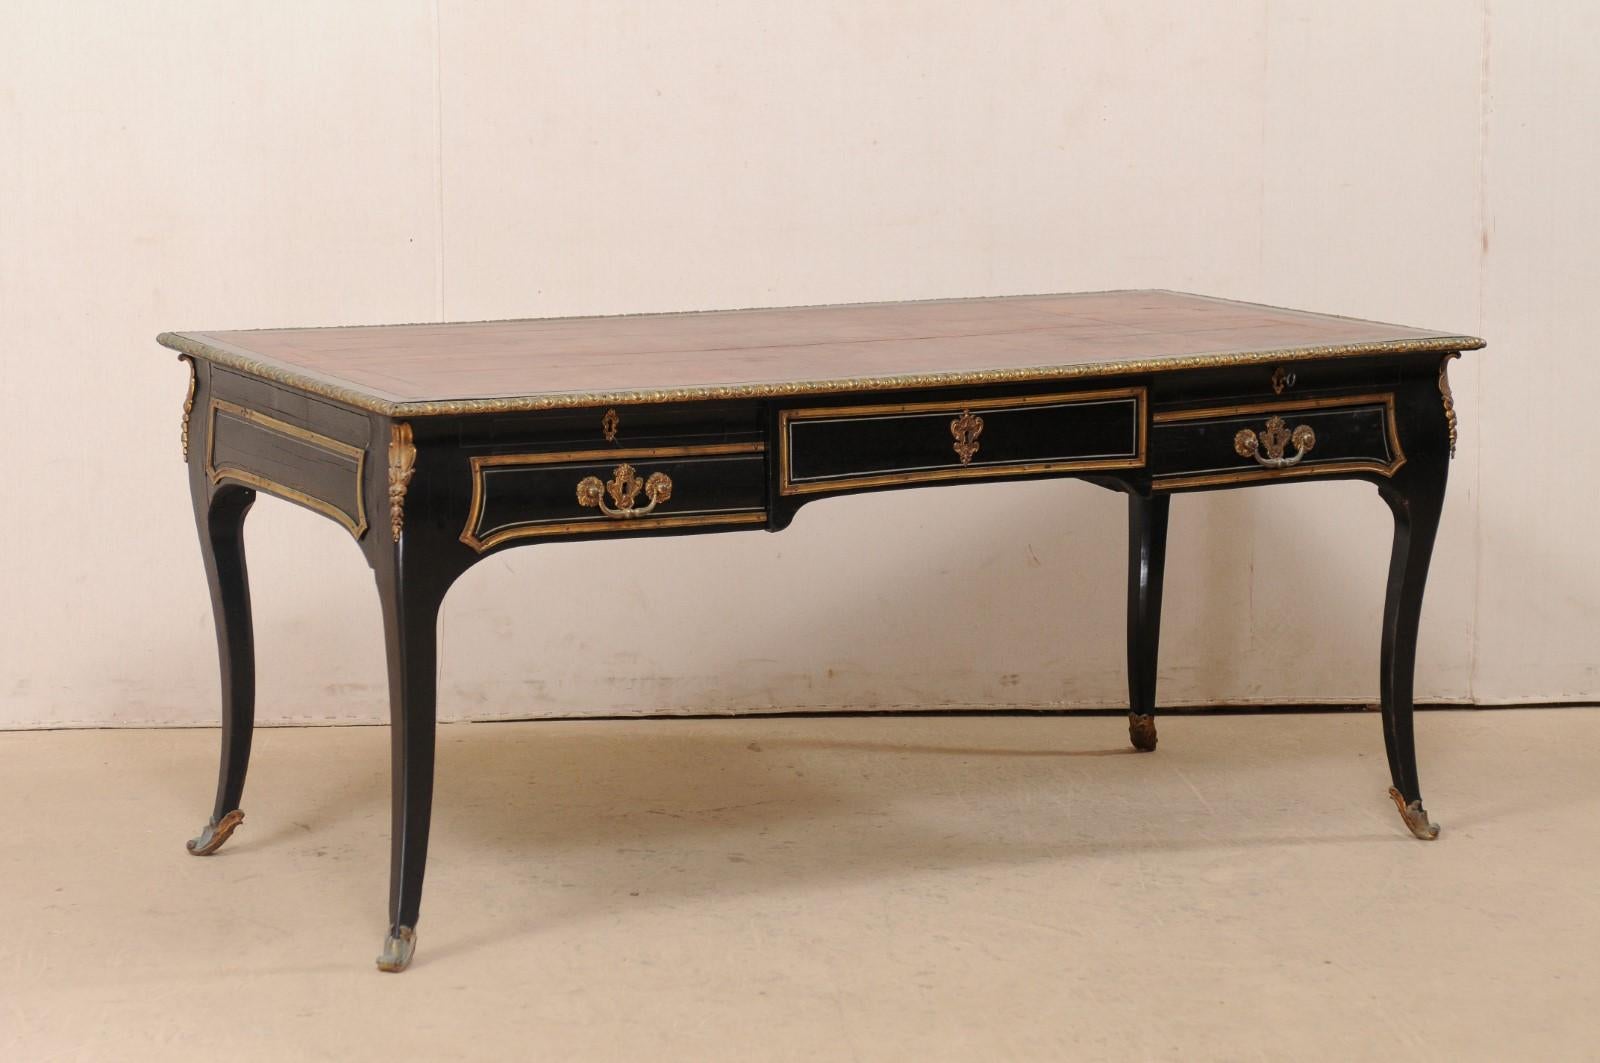 A French Louis XV style desk, with leather writing pad top, from the 19th century. This antique table from France has been designed in the Louis XV style with top fitted with a leather writing pad and top edging adorn in egg-and-dart carved trim.